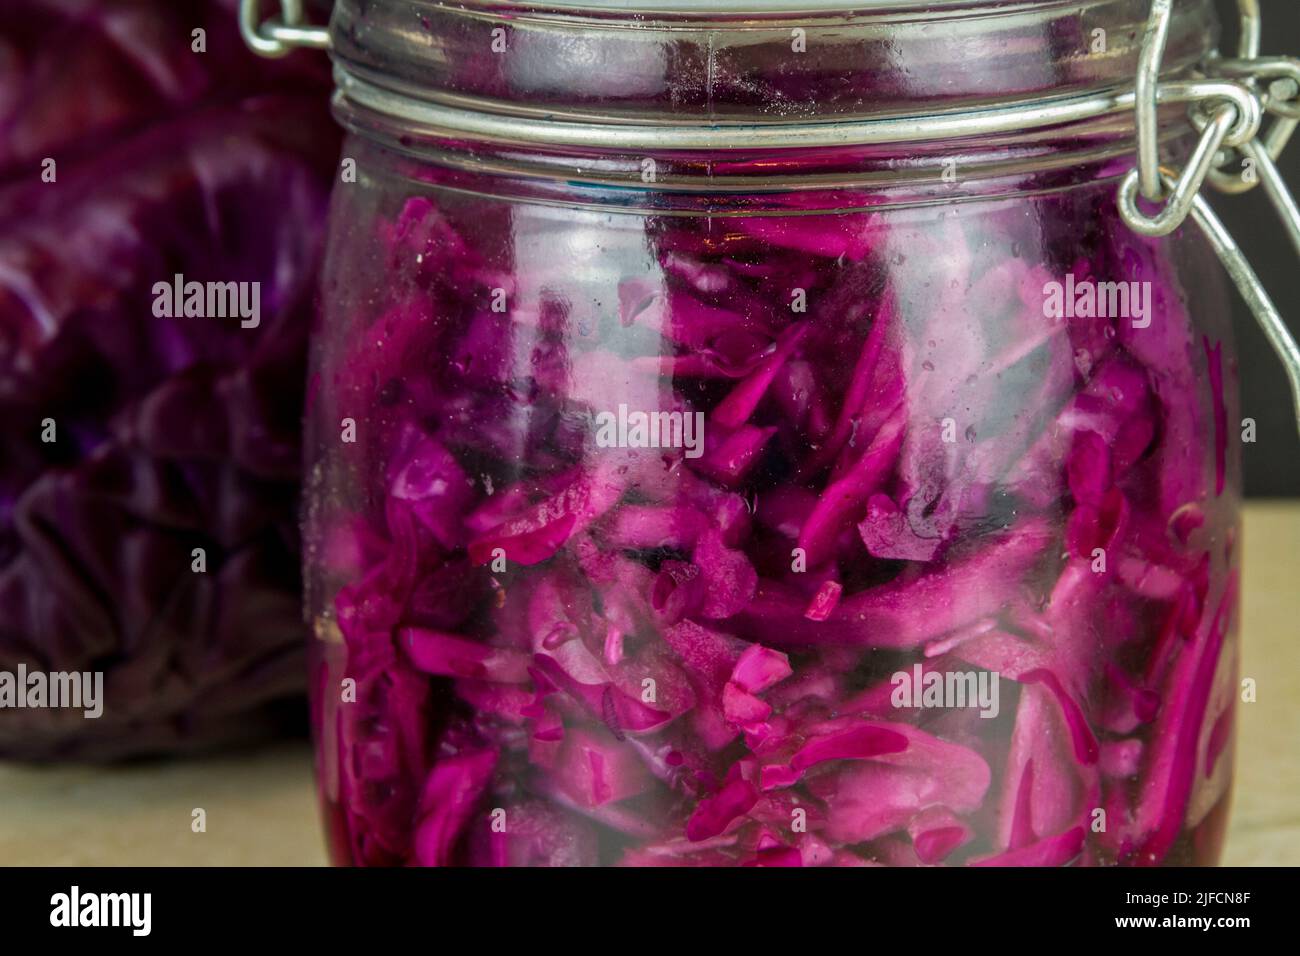 Jar of freshly made sauerkraut with whole red cabbage behind close up, macro. Stock Photo